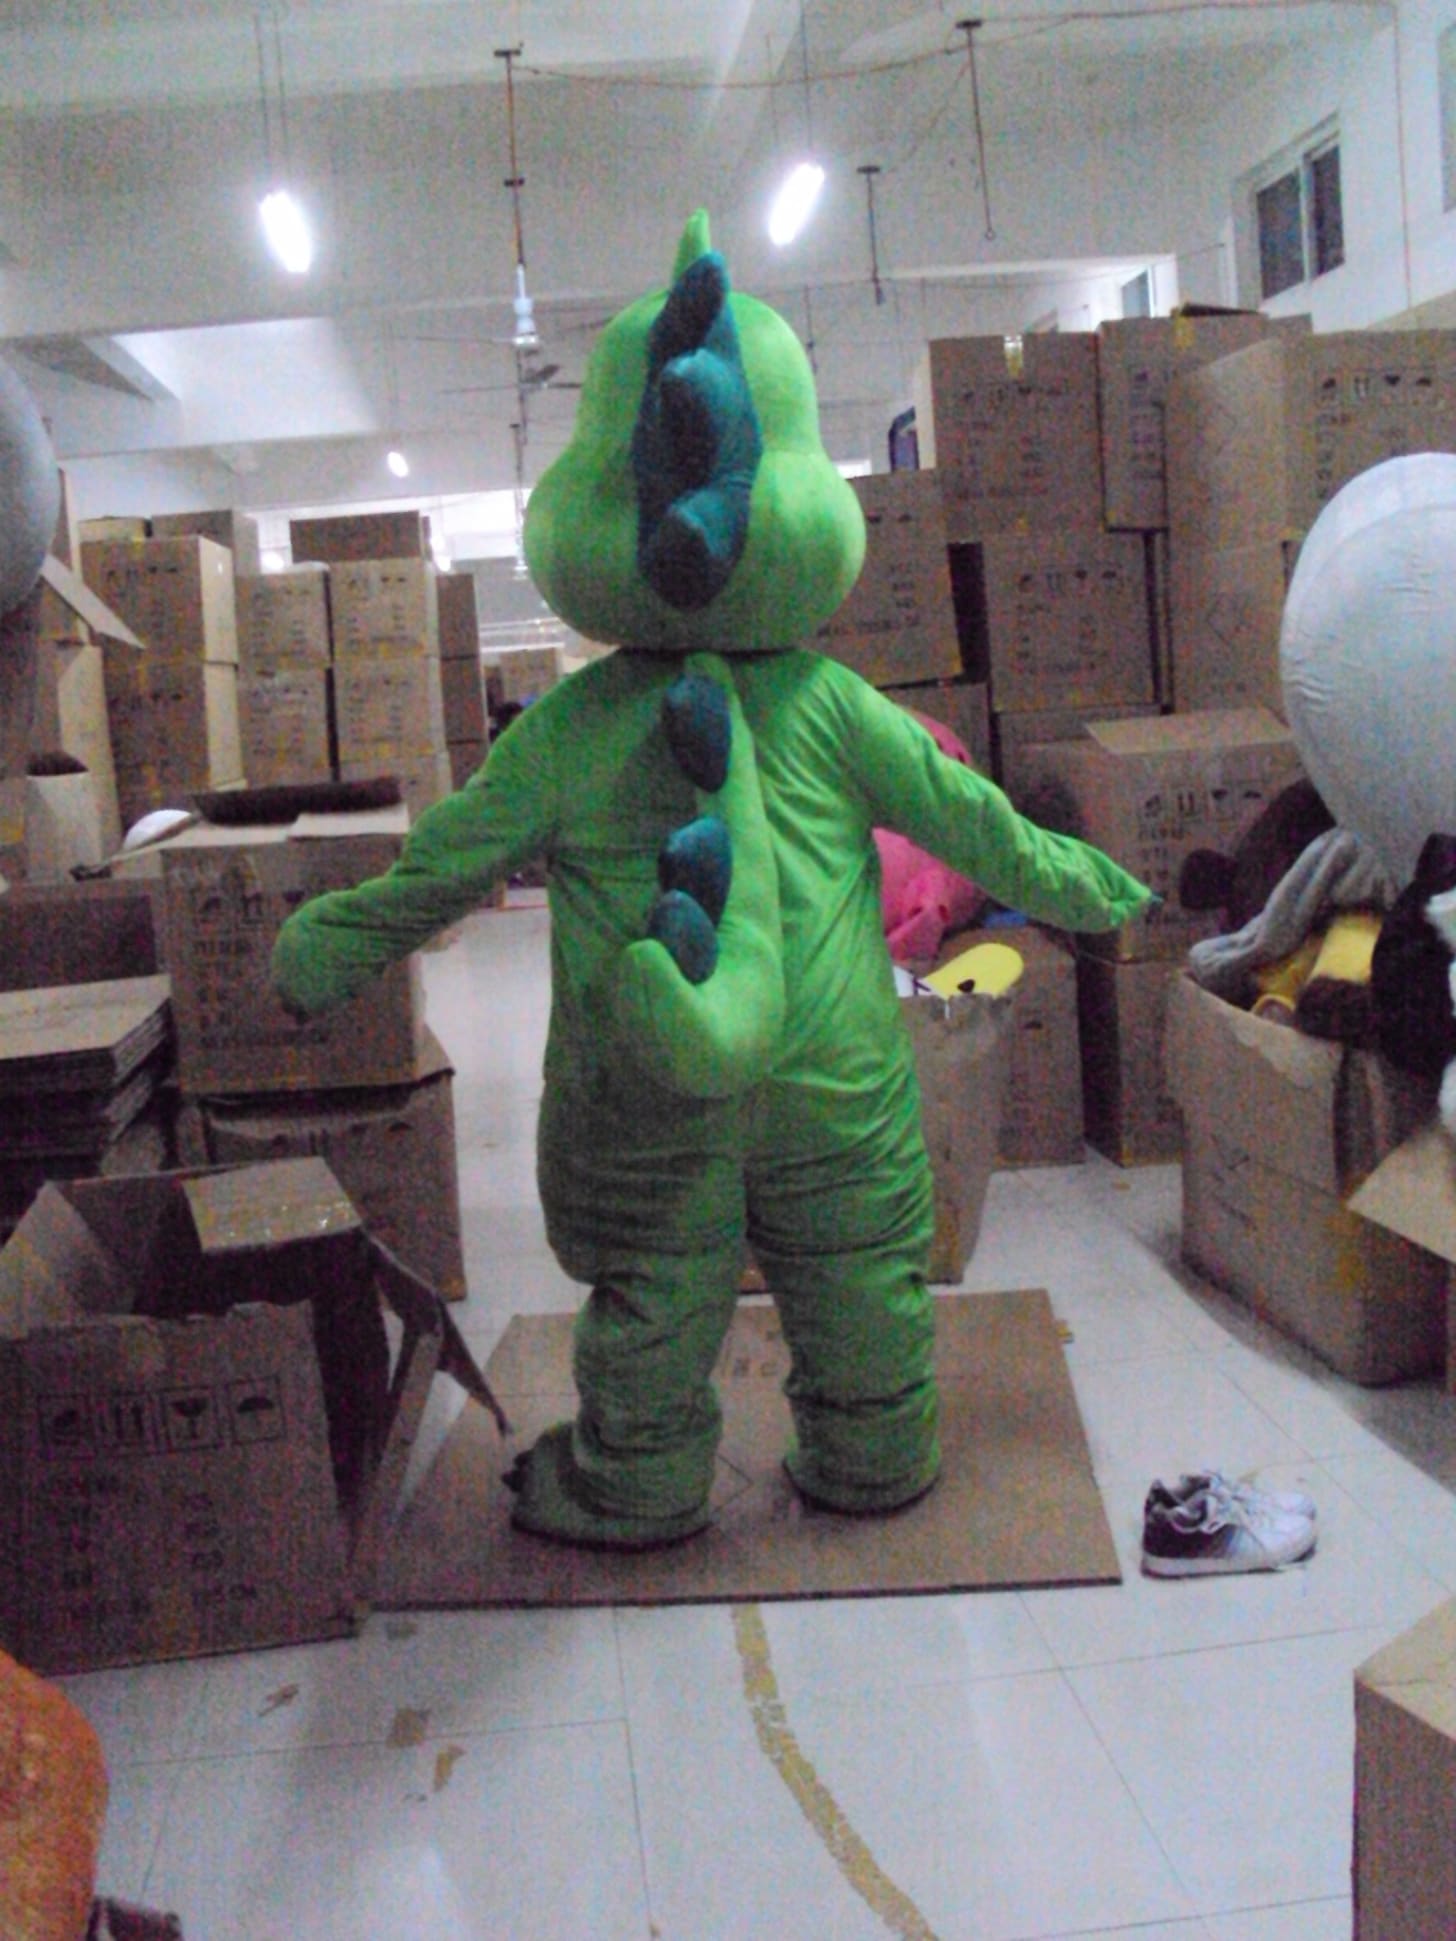 Details about  / Yoshi Dinosaur Super Mario Mascot Costume Fancy Party Dress Free Shipping 2019